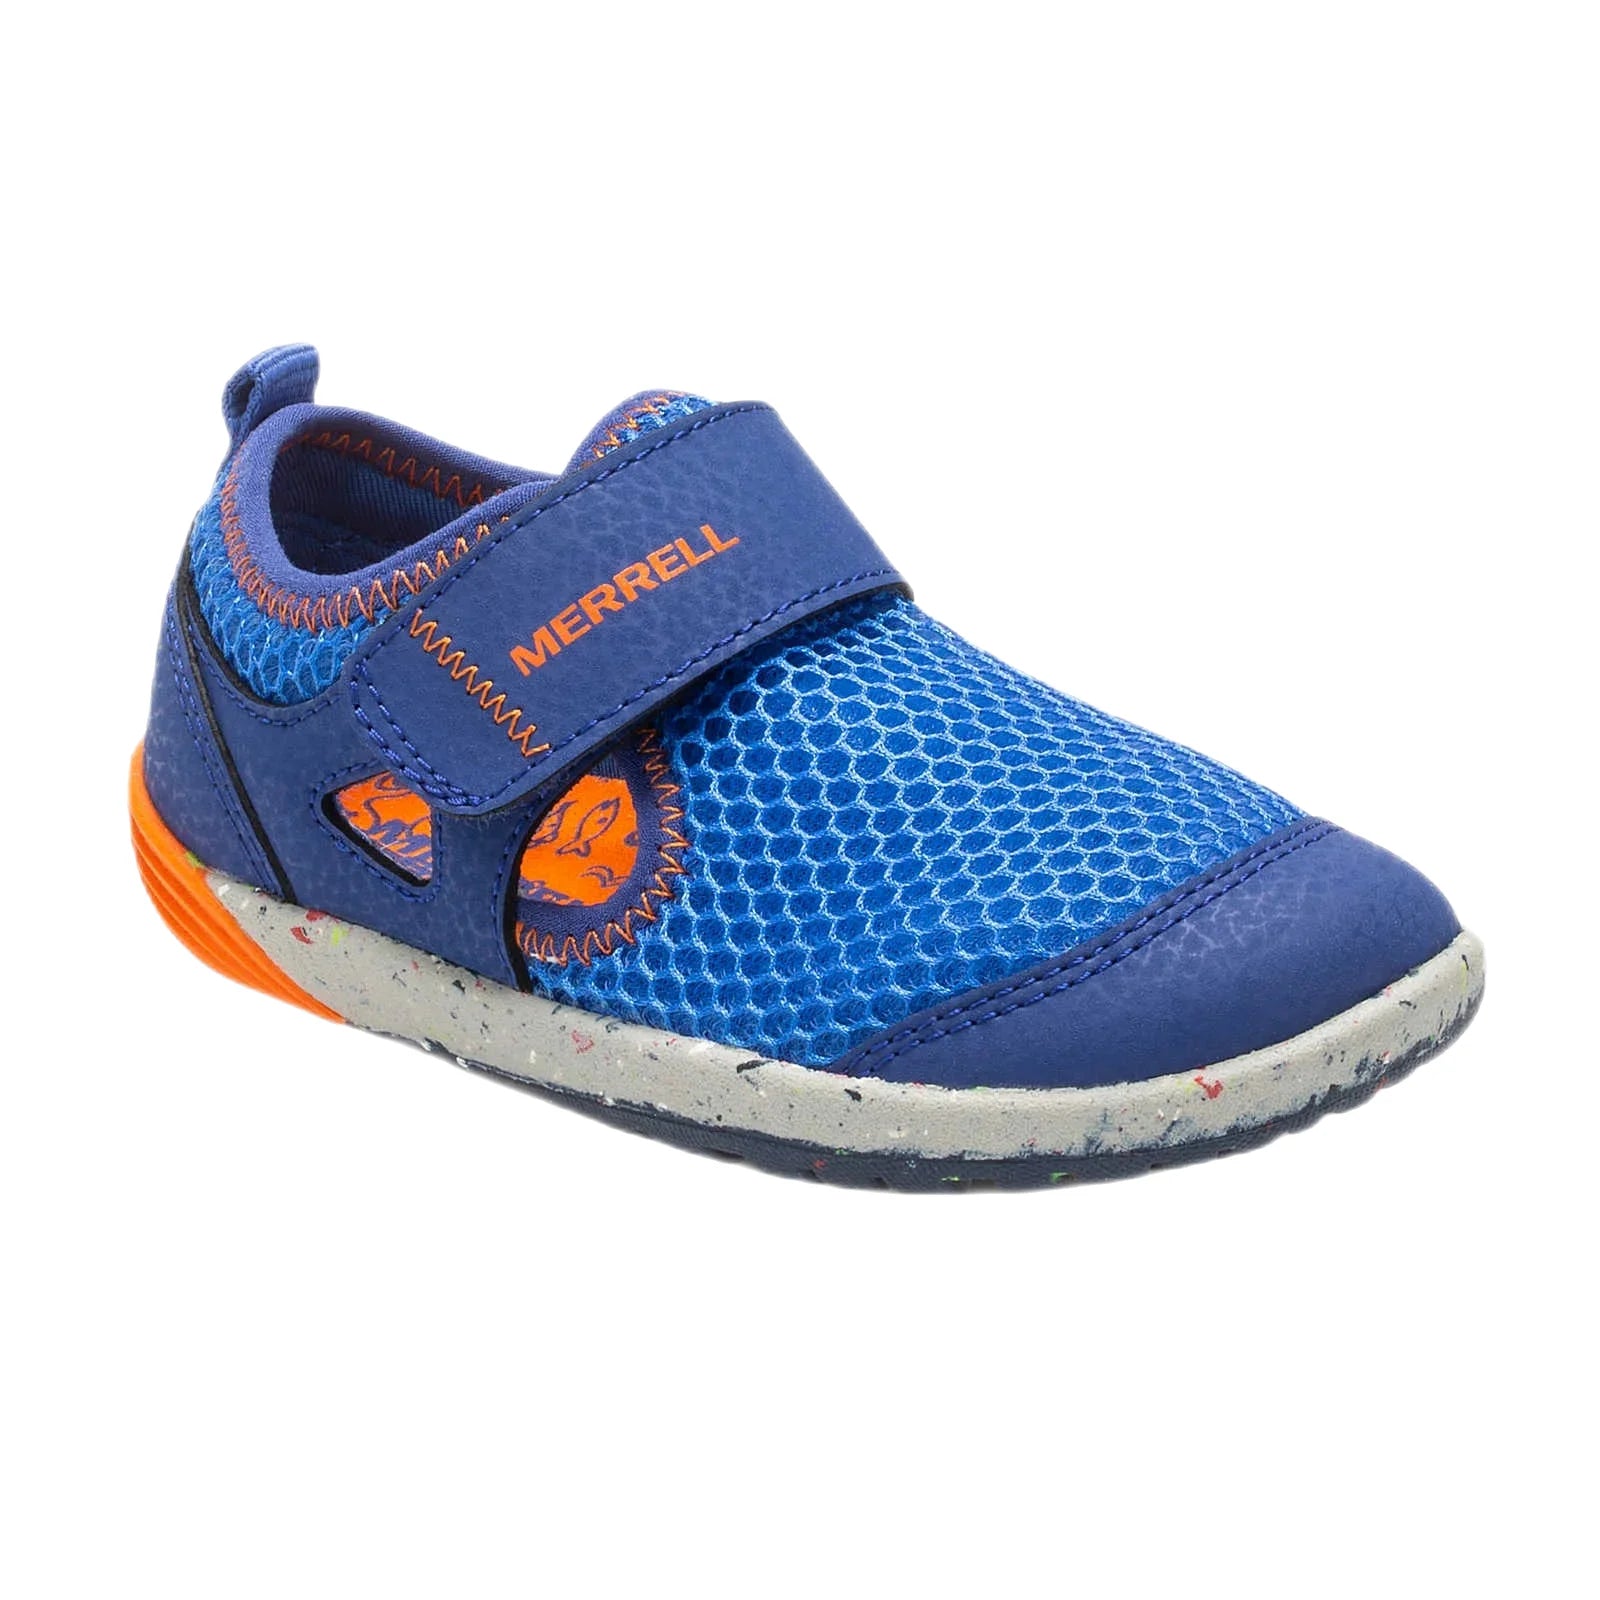 Merrell K's Bare Steps® H2O Sneaker, Blue Orange, front and side view 